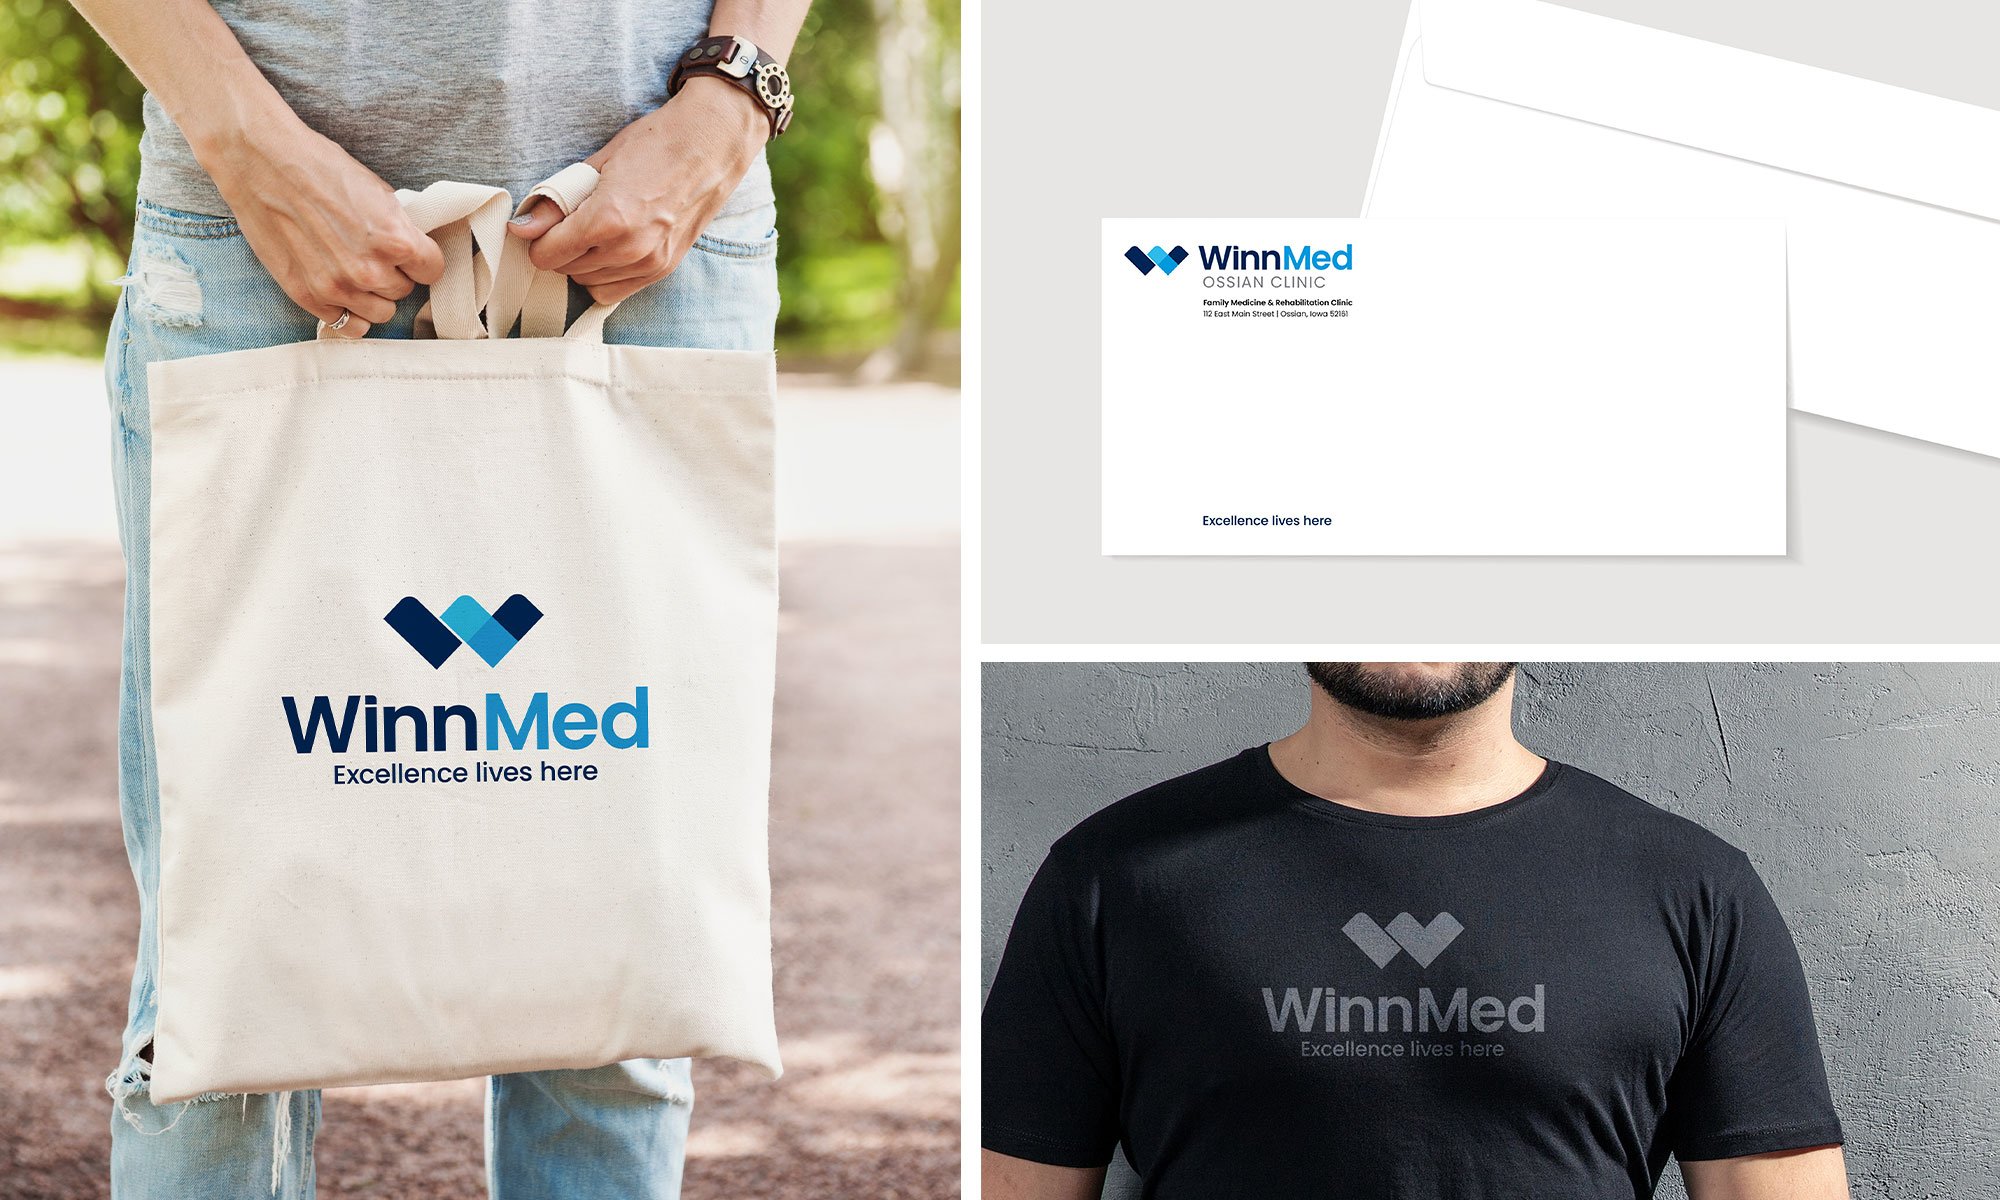 WinnMed branding on a tote bag, envelop, and a black tshirt with a gray WinnMed logo.